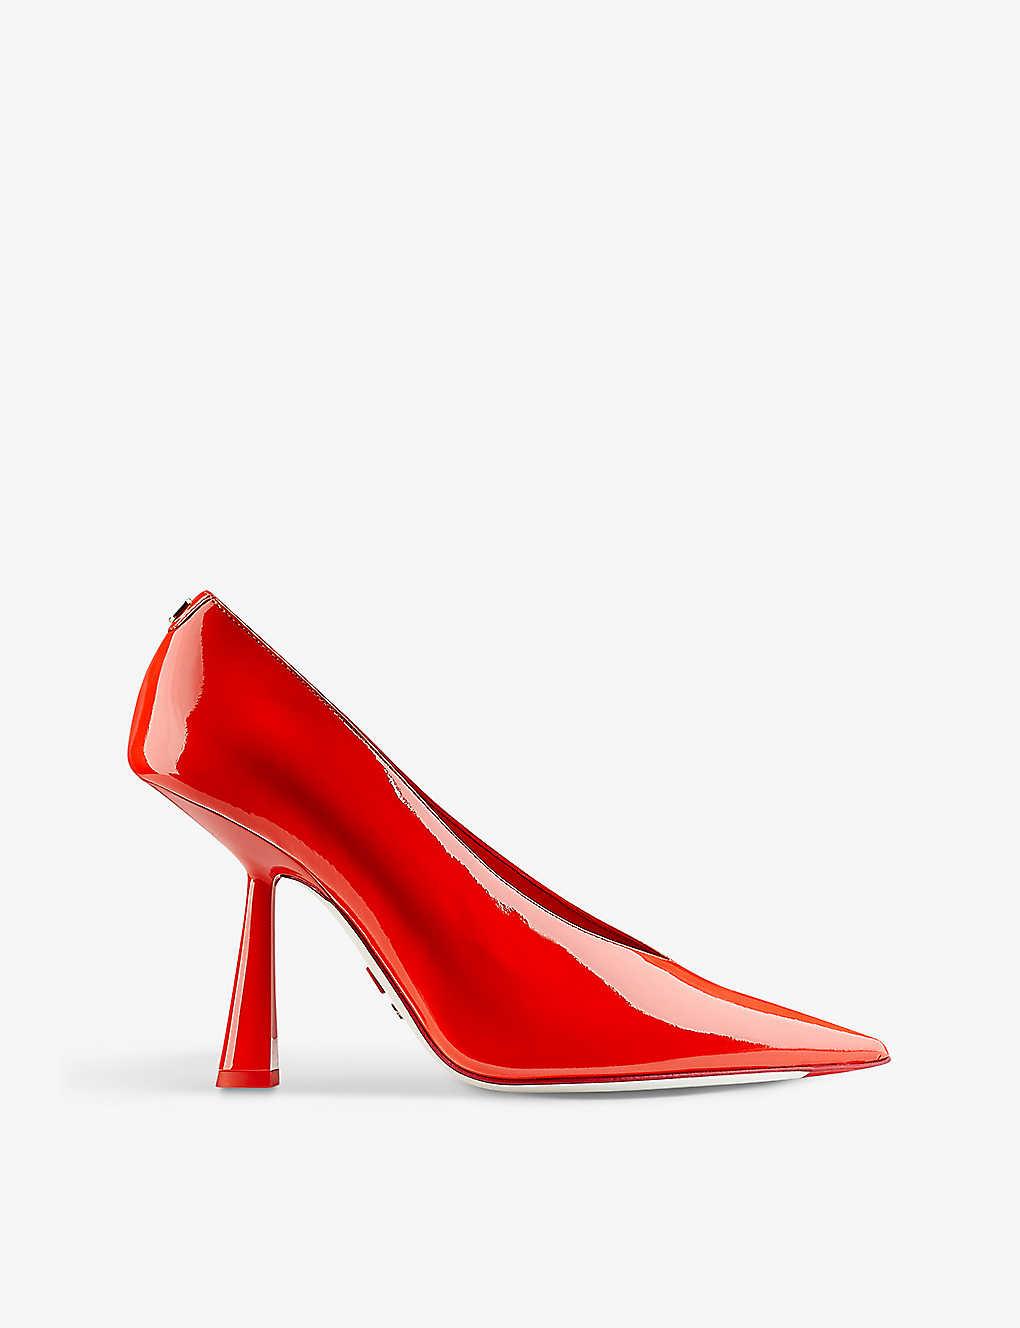 Jimmy Choo Sailor Mars Pump 100 Leather Heeled Courts in Red | Lyst